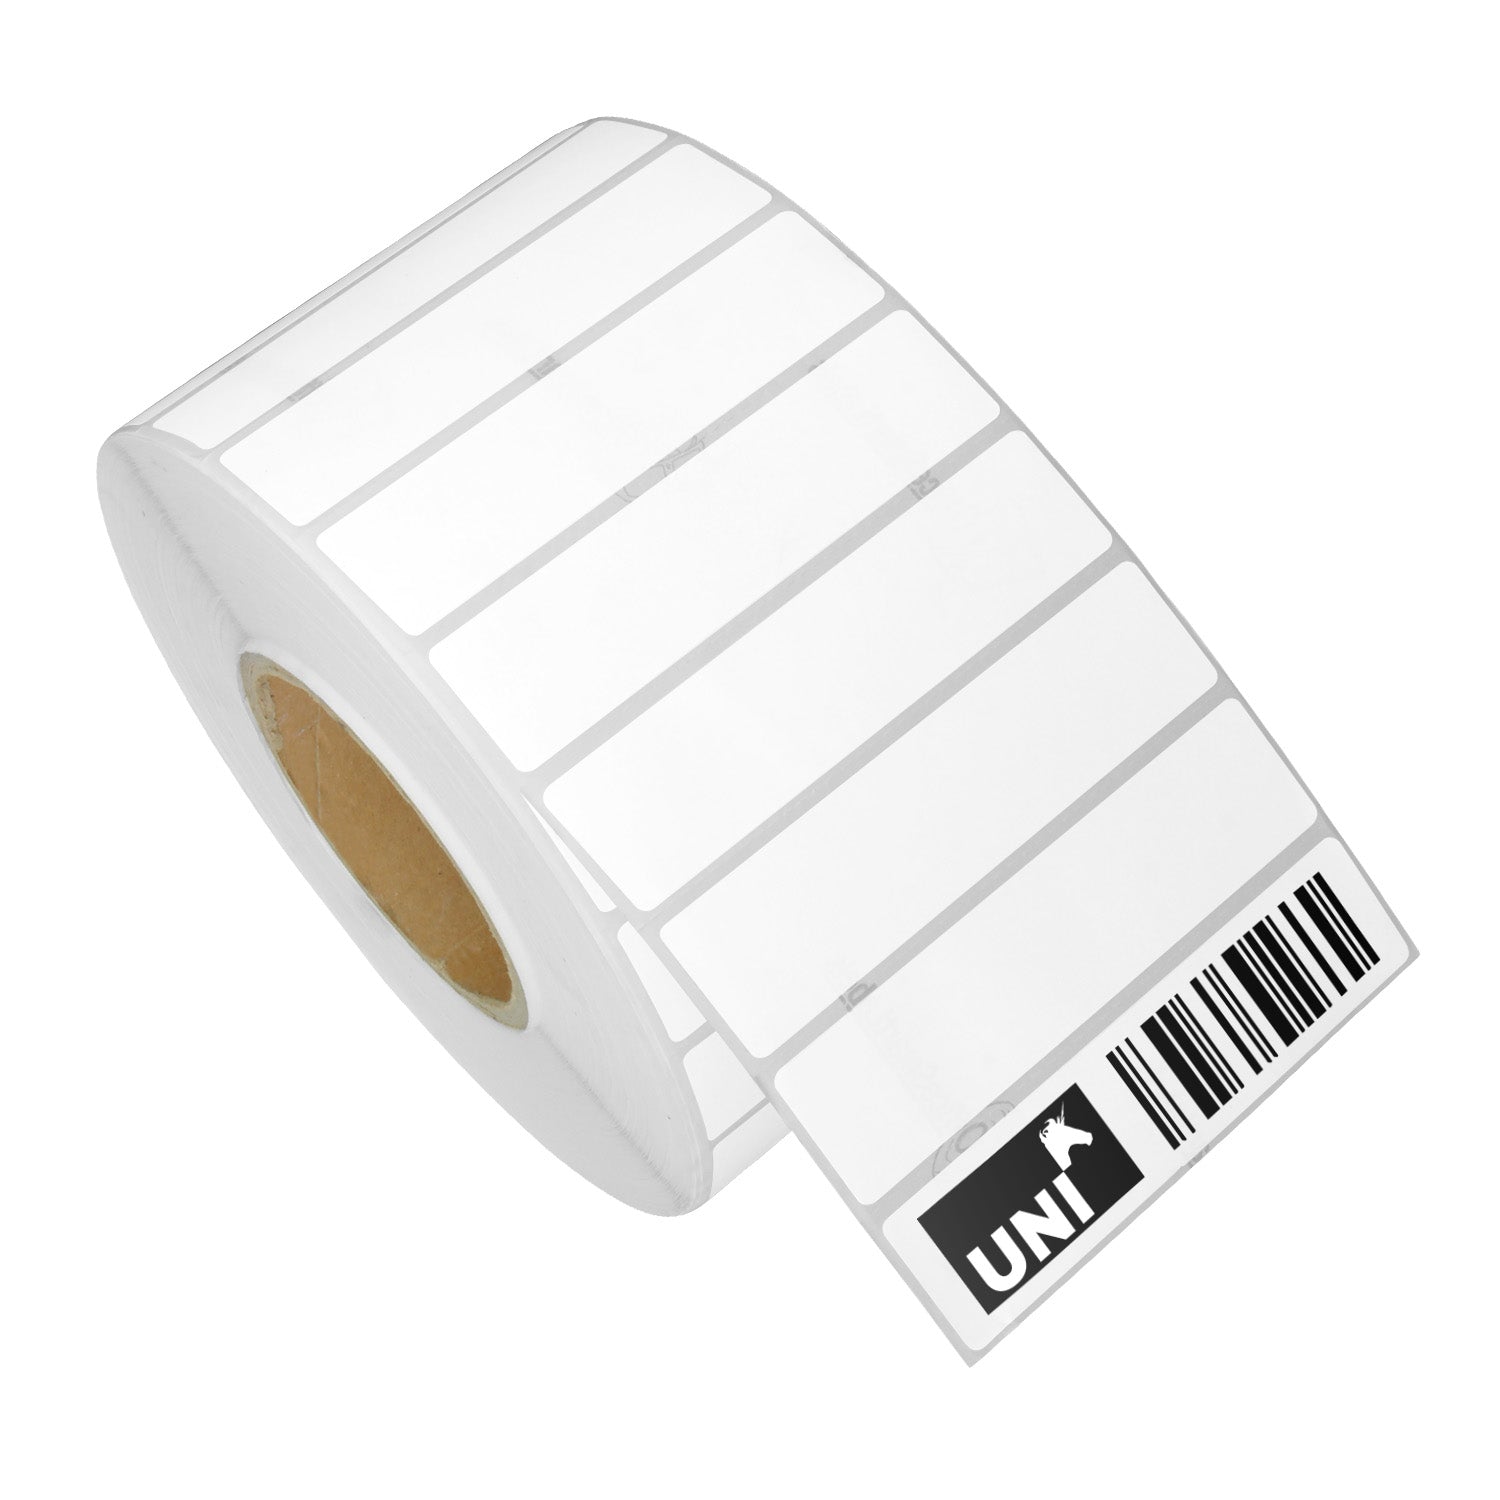 4 x 1 inch  Blank Direct Thermal Labels (Removable Adhesive / 1